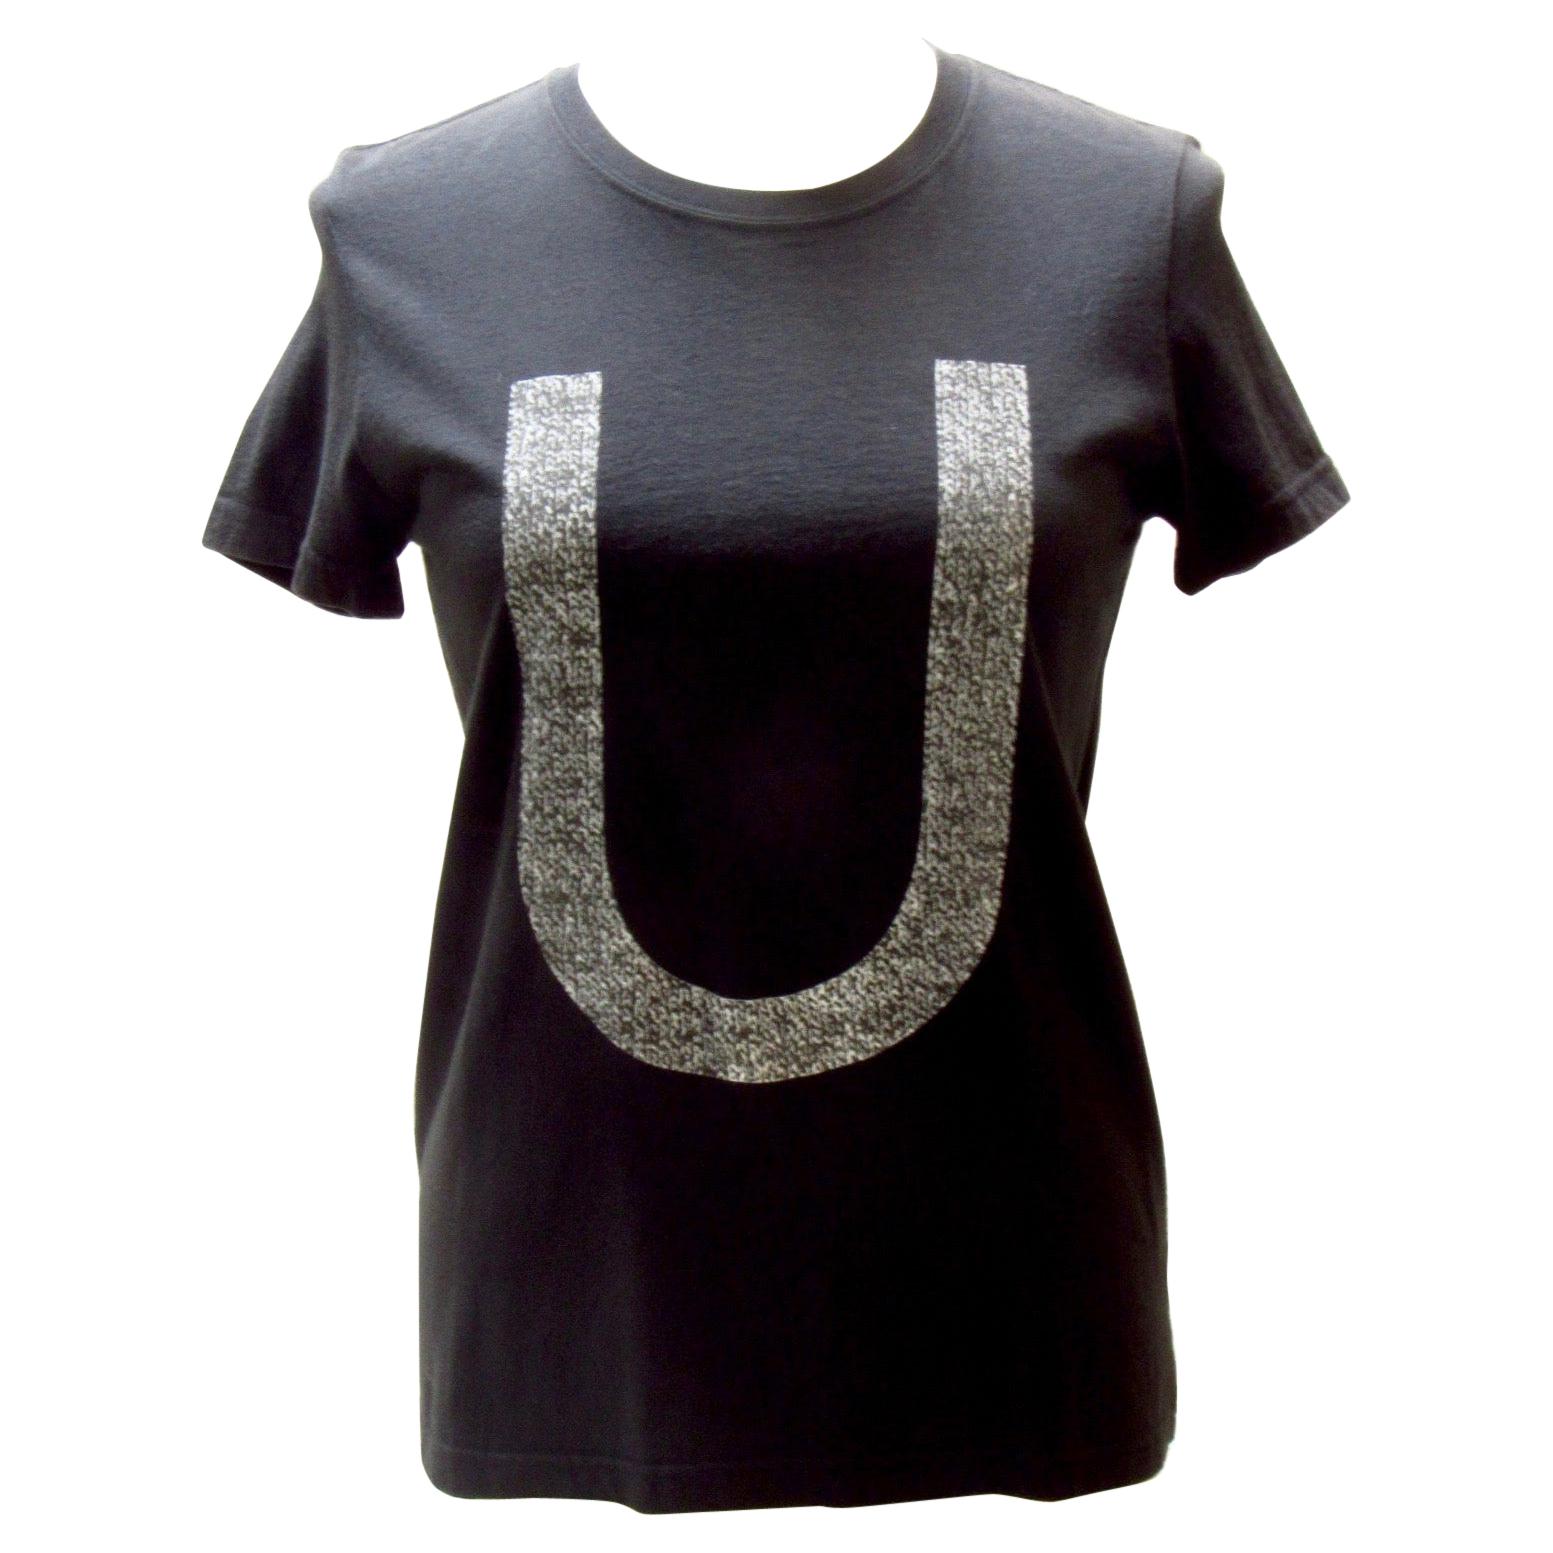 Undercover "U" Tee For Sale